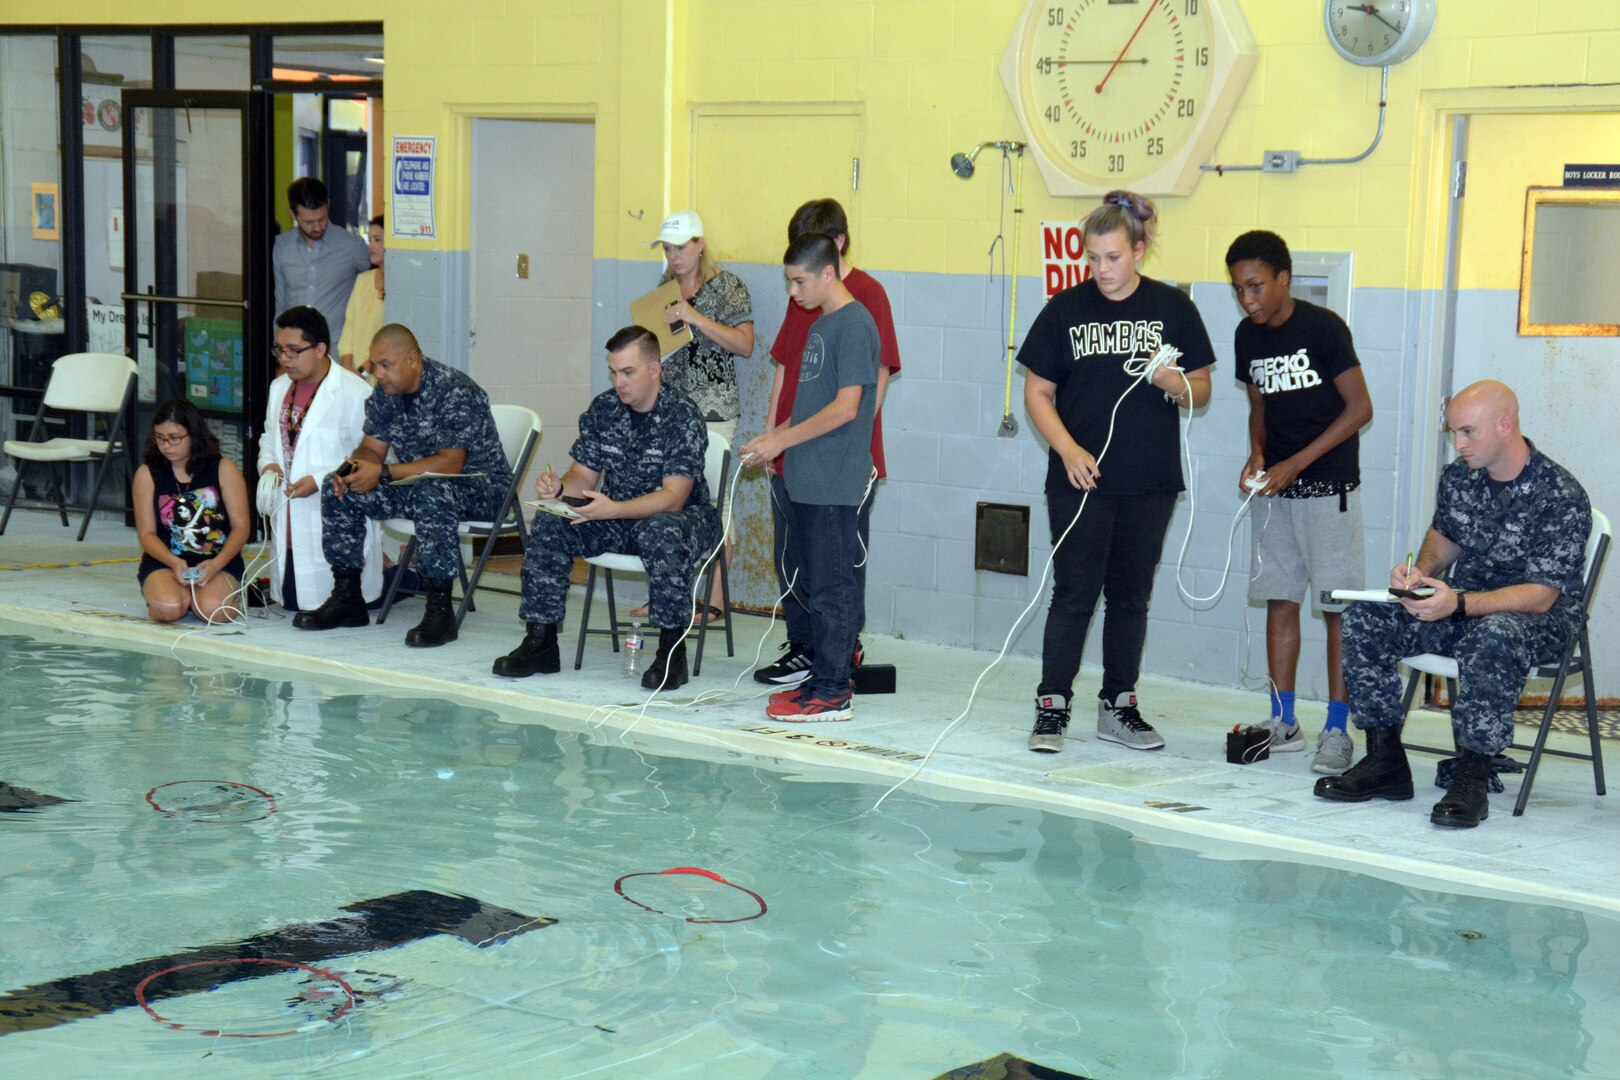 Northeast Lakeview College and the Boys & Girls Clubs of San Antonio, in cooperation with Navy City Outreach Southwest Region and Navy Recruiting District (NRD) San Antonio, hosted a SeaPerch Underwater Robotics Challenge Scrimmage at the Eastside Branch Boys & Girls Club July 27.  Twelve teams consisting of 45 middle and high school students from the San Antonio area participated as part of the annual SeaPerch Regional Challenge Prep Camp hosted by Northeast Lakeview College and the Boys & Girls Clubs of San Antonio, in cooperation with Navy City Outreach Southwest Region and Navy Recruiting District (NRD) San Antonio. 